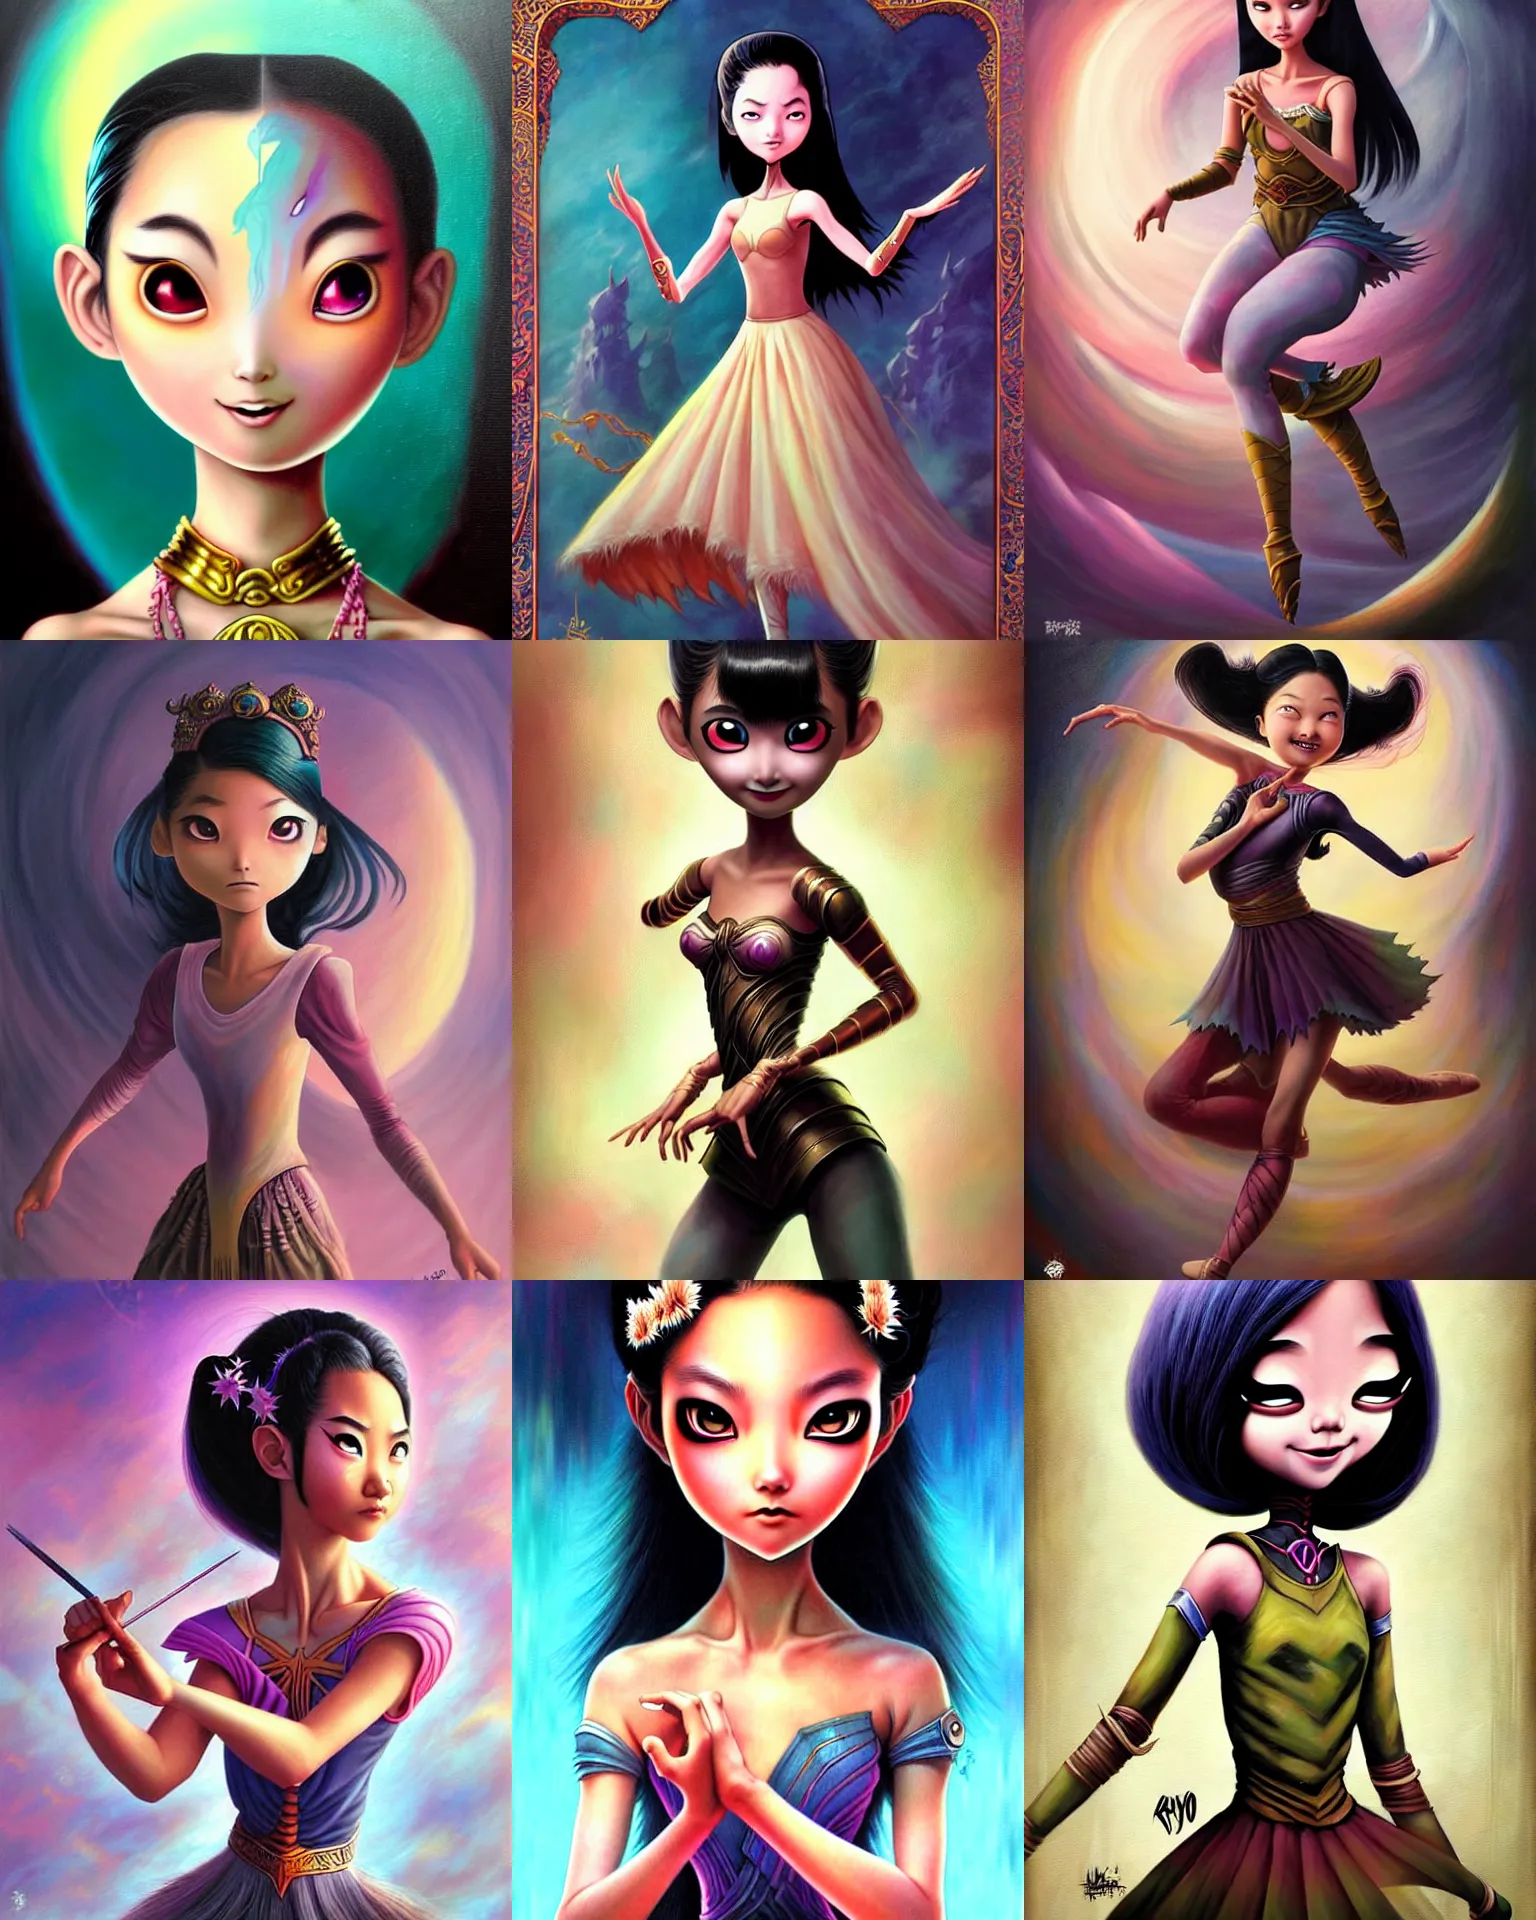 Prompt: an epic fantasy comic book style painting of a young malaysian woman, fighting ballerina, smile, expressive, pastel palette, dark piercing eyes, tan skin, beautiful futuristic hair style, awesome pose, character design by mark ryden pixar hayao miyazaki, ue 5